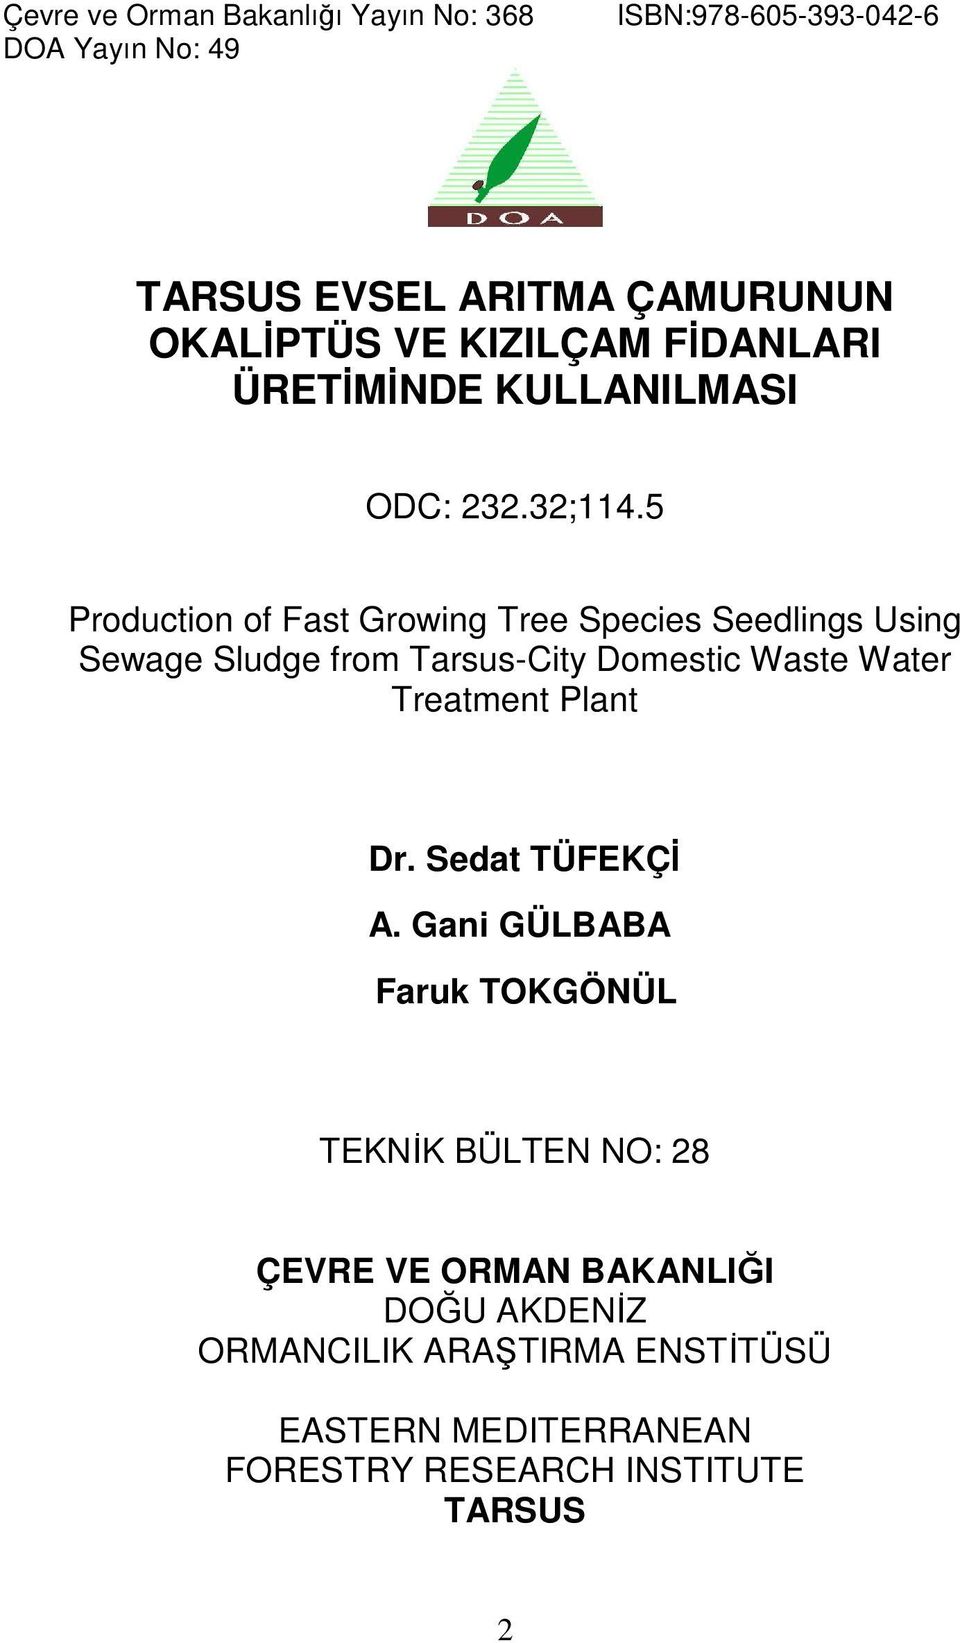 5 Production of Fast Growing Tree Species Seedlings Using Sewage Sludge from Tarsus-City Domestic Waste Water Treatment Plant